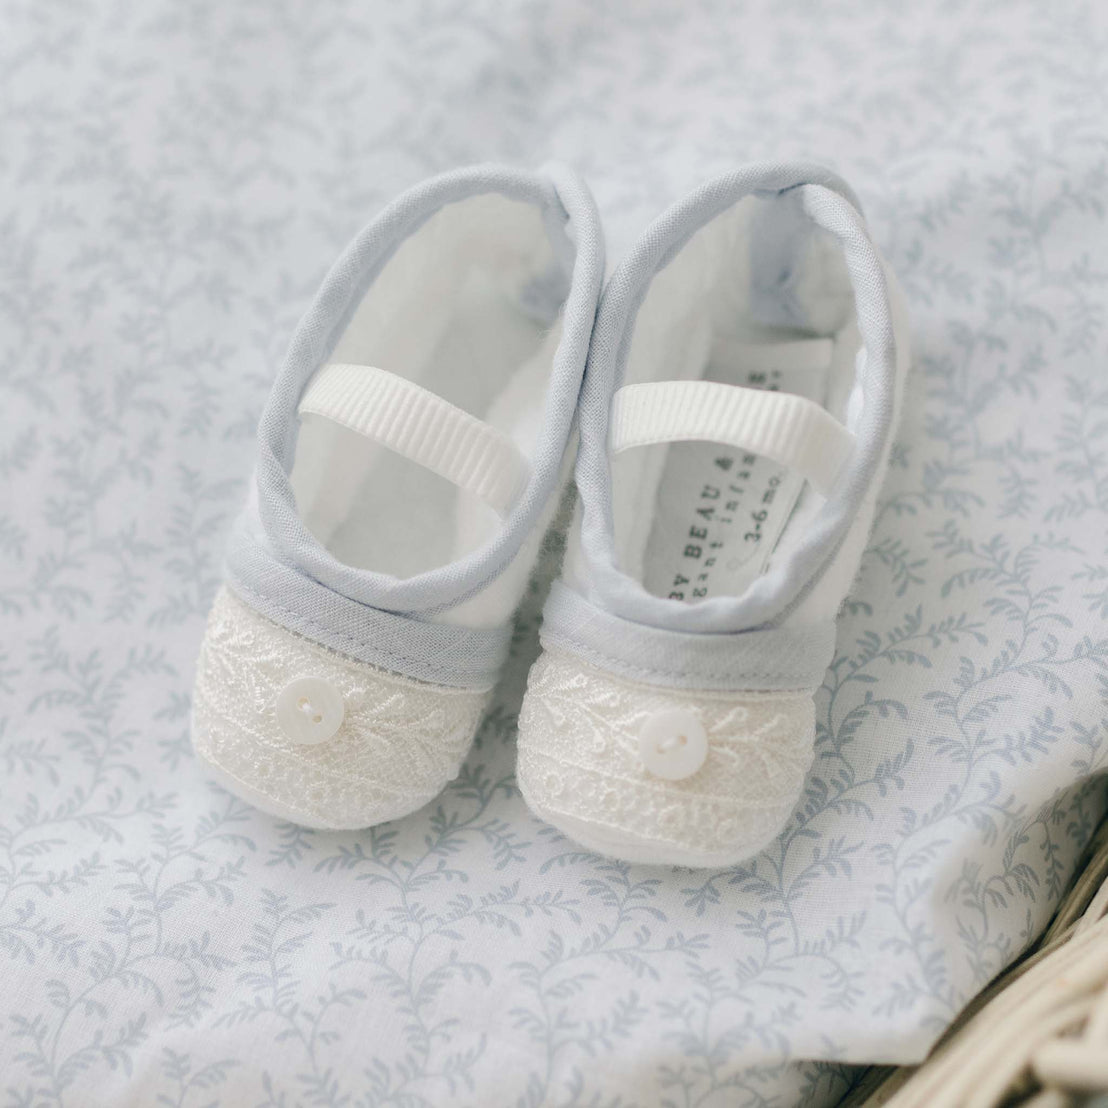 The image showcases a pair of Harrison Christening Booties, featuring white embroidered toes and light blue fabric. These baby shoes, ideal for a baptism outfit, are arranged on a subtly patterned floral fabric and secured with a white strap.